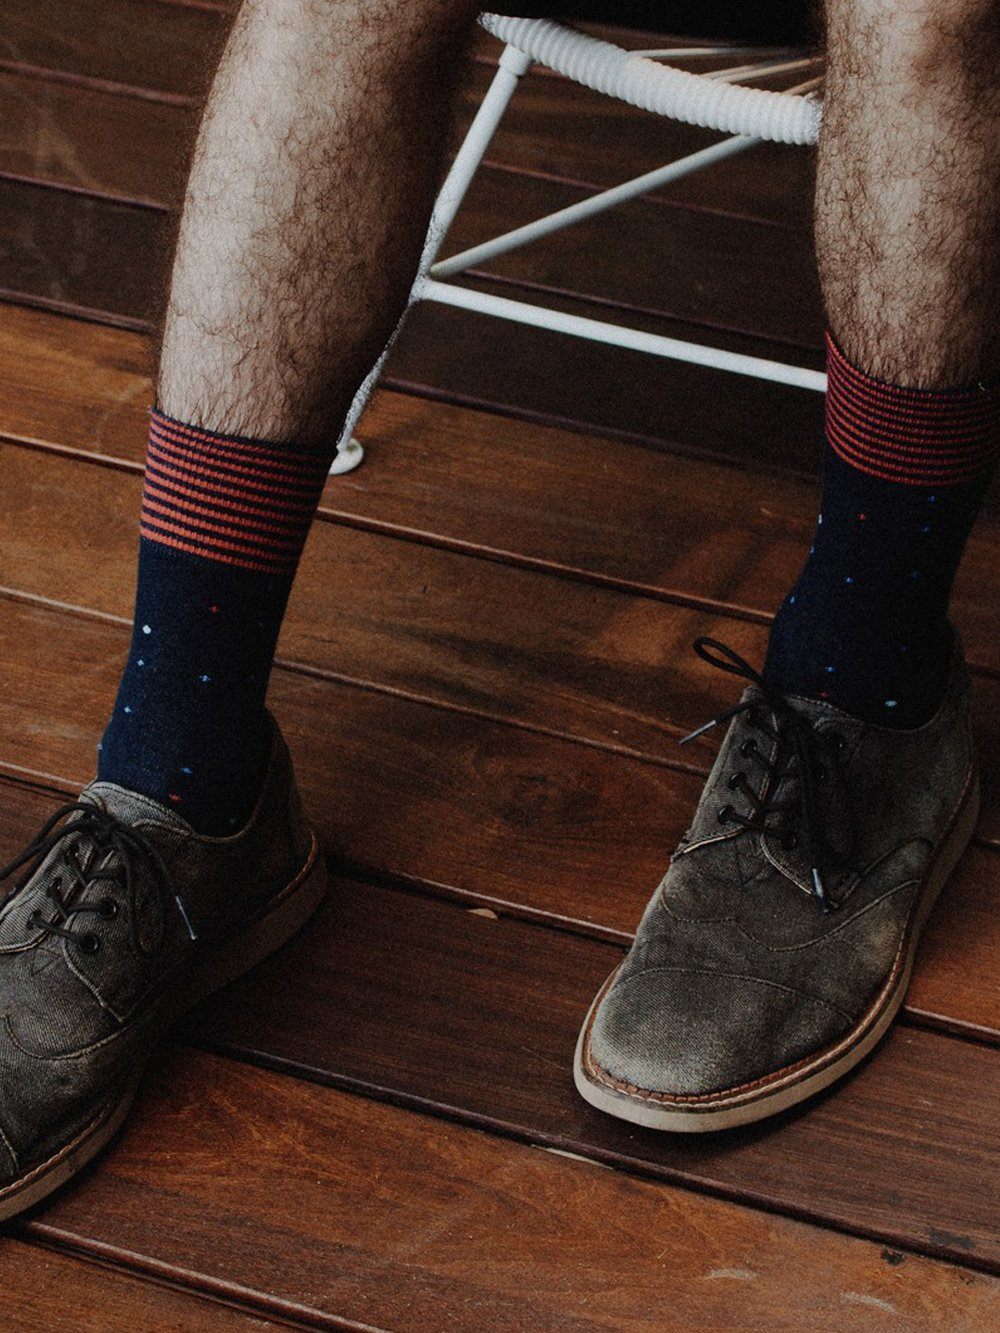 The Electorate - Navy - Sock Club Store